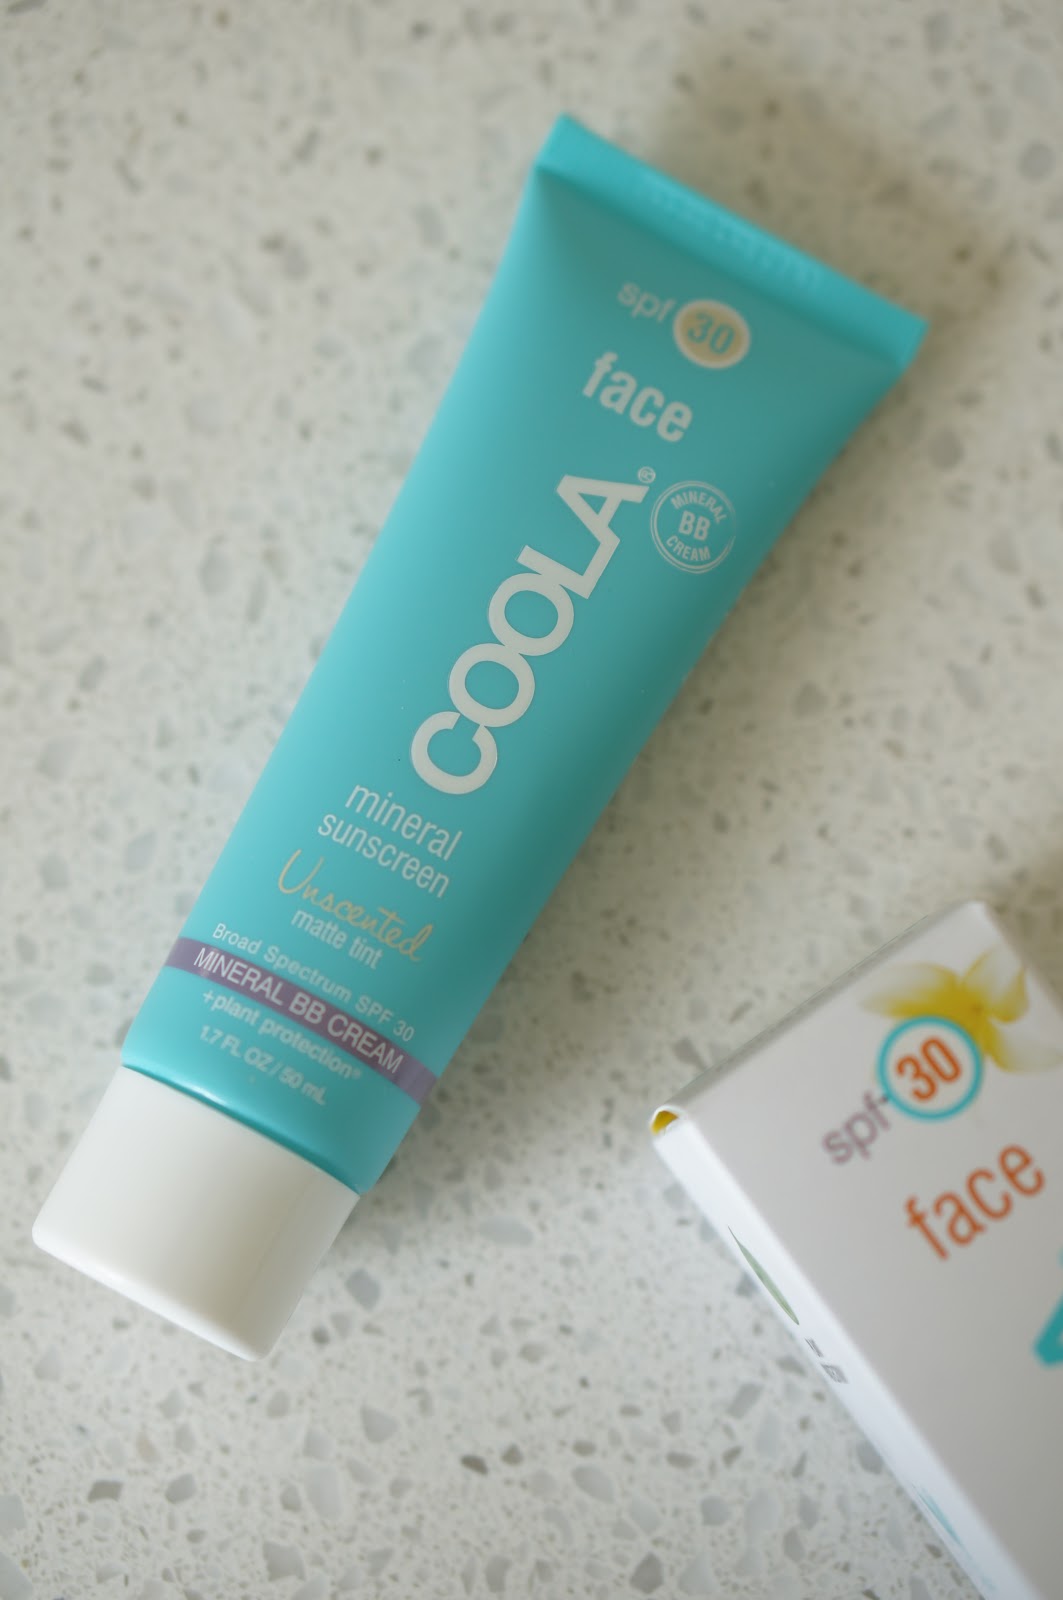 Popular North Carolina style blogger Rebecca Lately shares her review of the Coola BB Cream. Check out this cruelty free BB cream!